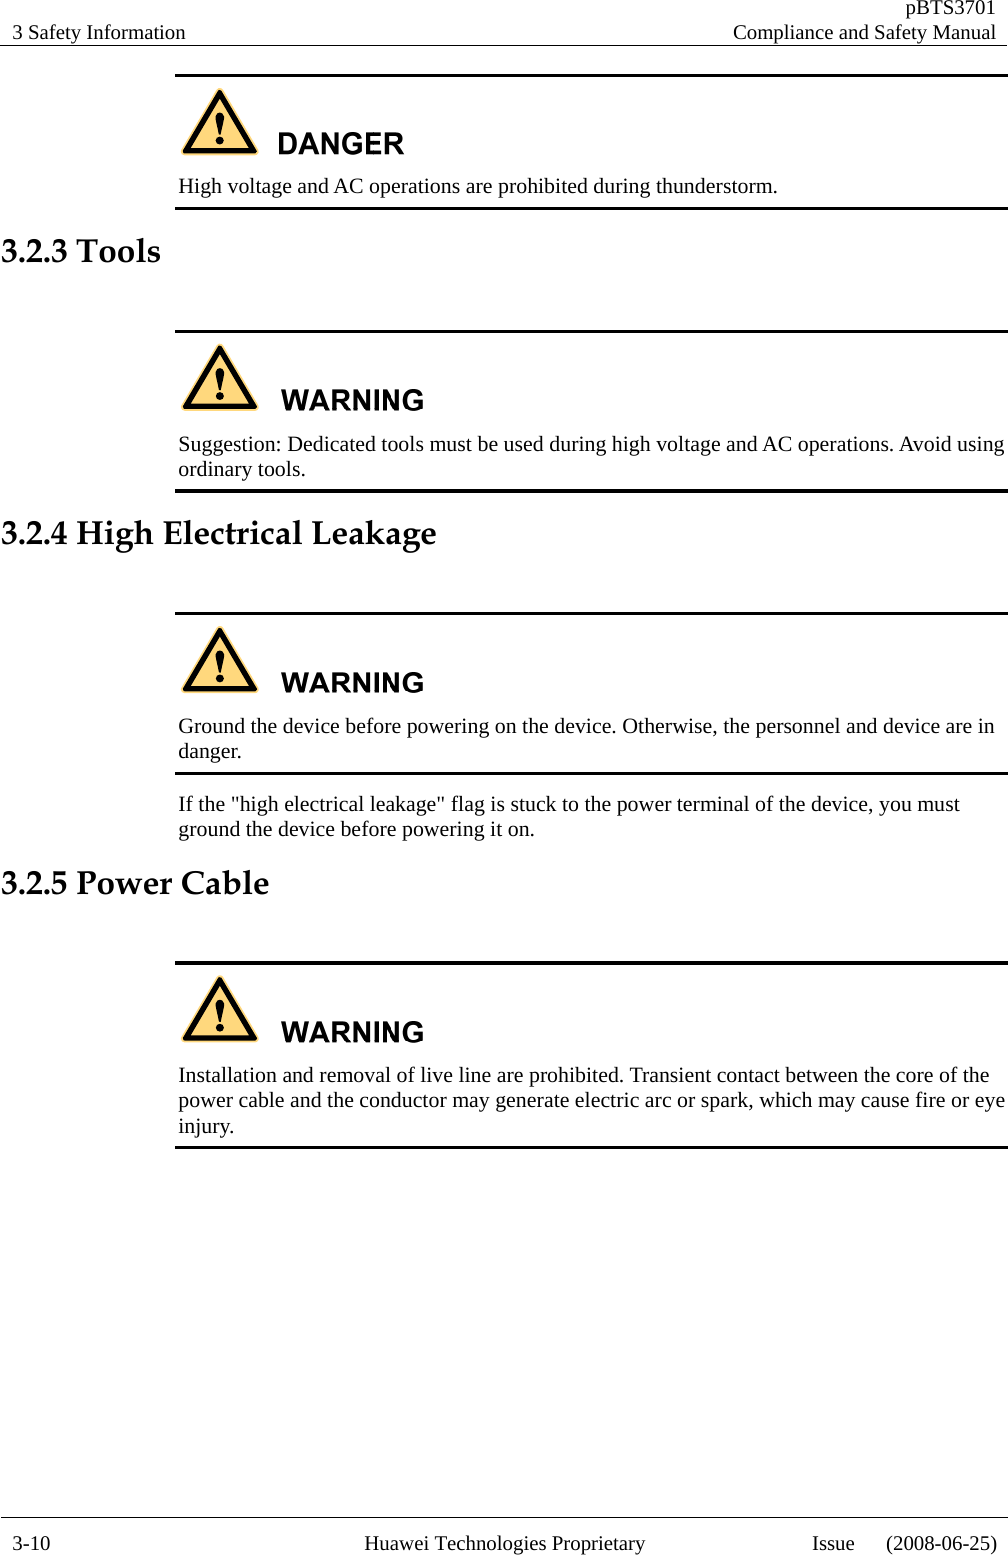 3 Safety Information   pBTS3701Compliance and Safety Manual 3-10  Huawei Technologies Proprietary  Issue      (2008-06-25) High voltage and AC operations are prohibited during thunderstorm. 3.2.3 Tools   Suggestion: Dedicated tools must be used during high voltage and AC operations. Avoid using ordinary tools. 3.2.4 High Electrical Leakage   Ground the device before powering on the device. Otherwise, the personnel and device are in danger. If the &quot;high electrical leakage&quot; flag is stuck to the power terminal of the device, you must ground the device before powering it on. 3.2.5 Power Cable   Installation and removal of live line are prohibited. Transient contact between the core of the power cable and the conductor may generate electric arc or spark, which may cause fire or eye injury.   